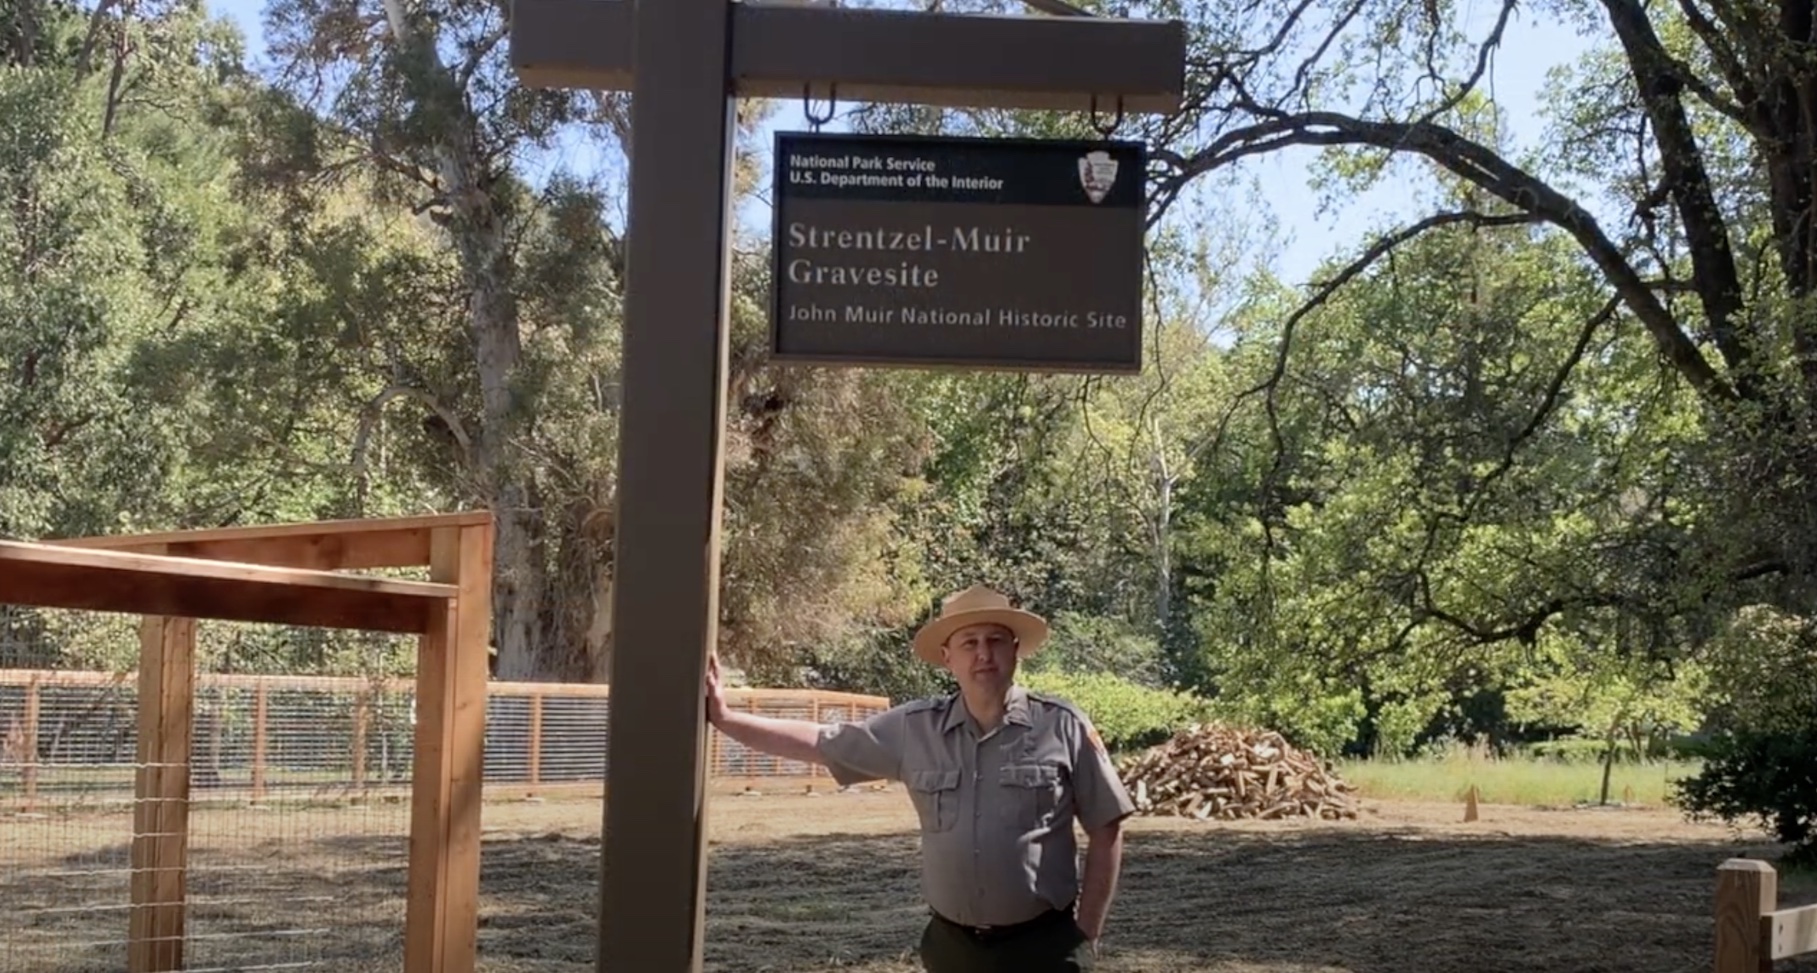 Tom Leatherman, Superintendent of John Muir National Historic Site, shows new signage and fencing at the gravesite, 2021